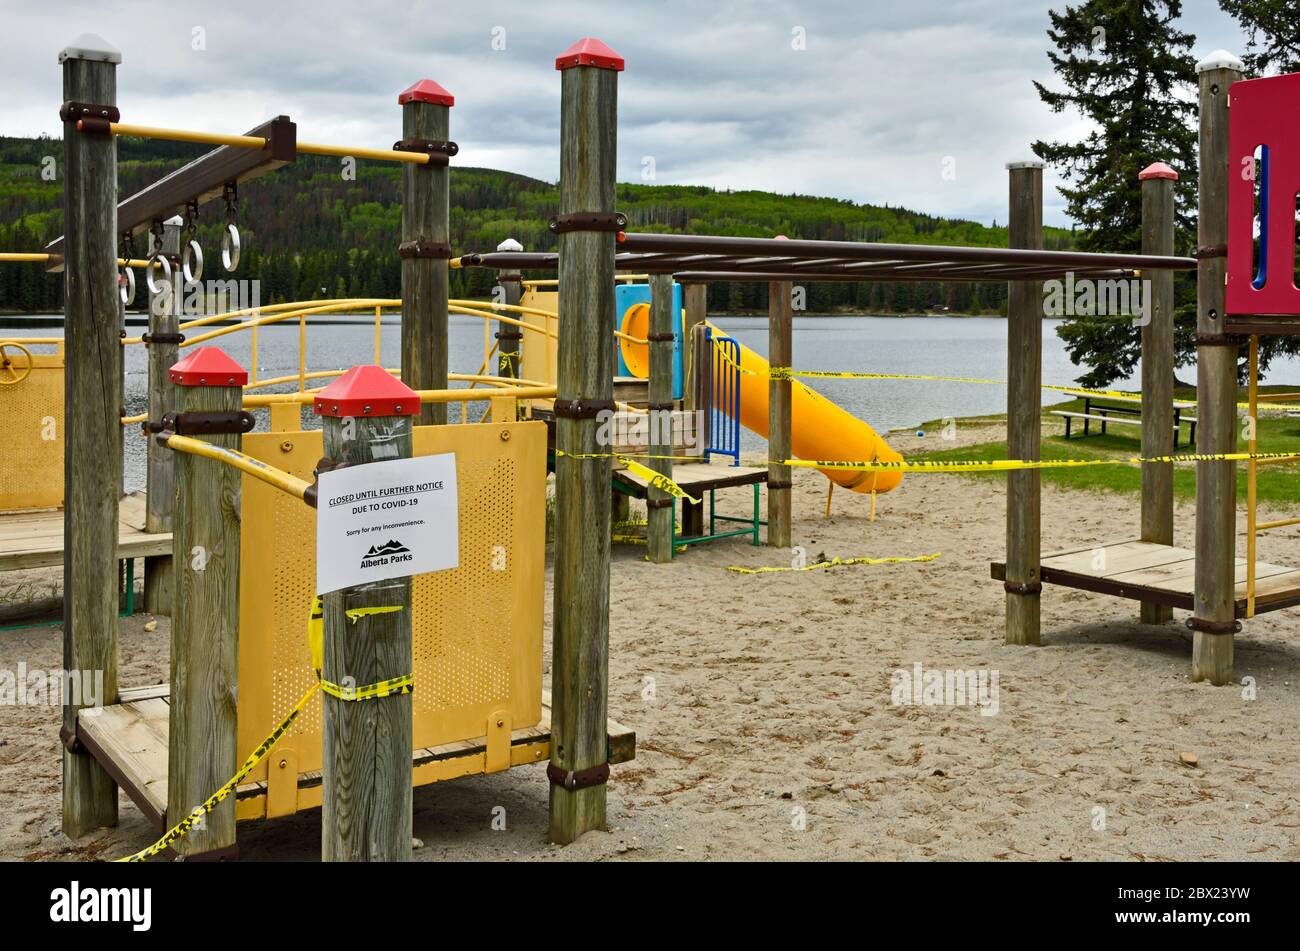 A children's playground closed because of the Covid-19 in a provincial park in rural Alberta Canada. Stock Photo